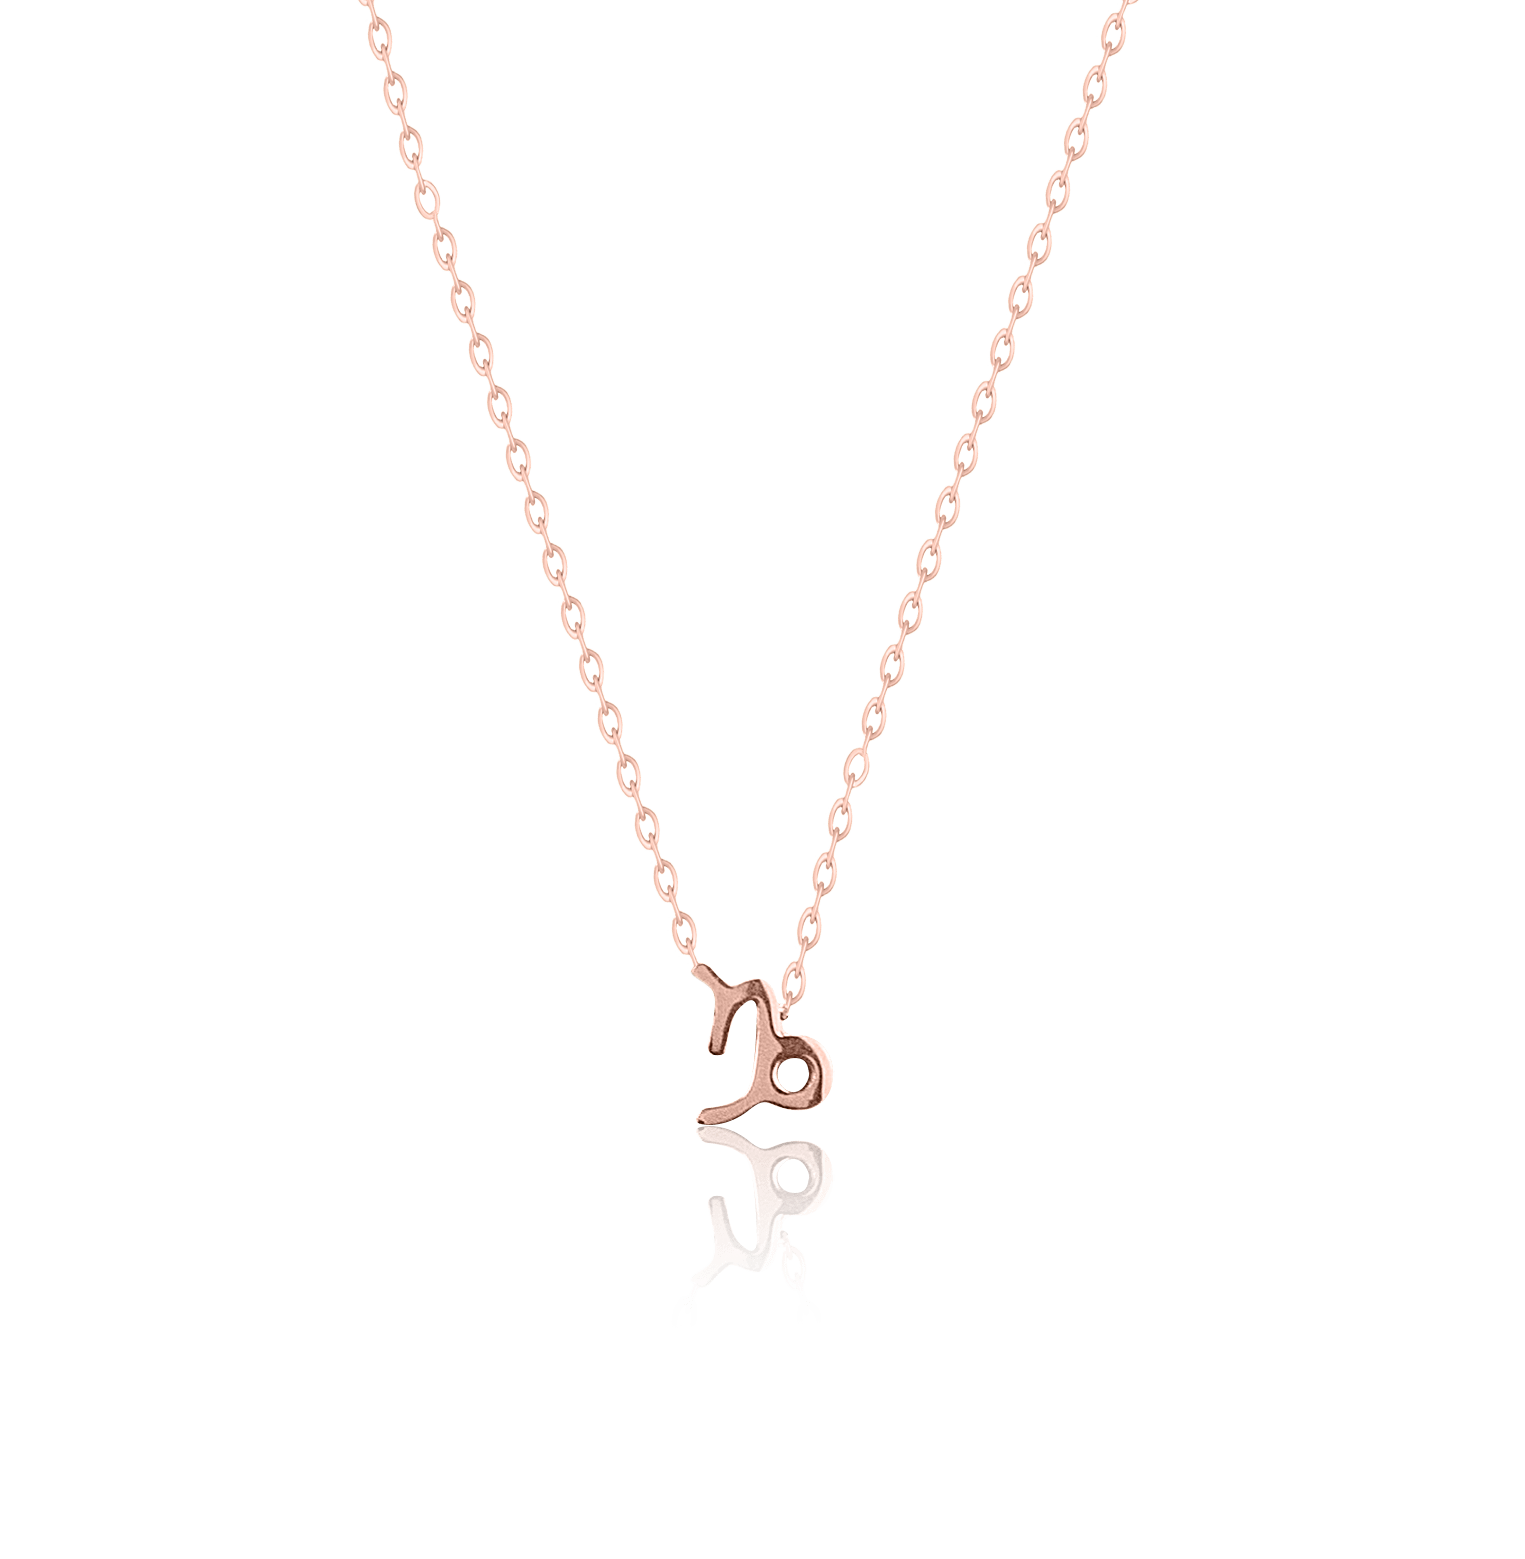 bianco rosso Necklaces Rose Gold Capricorn - Necklace cyprus greece jewelry gift free shipping europe worldwide